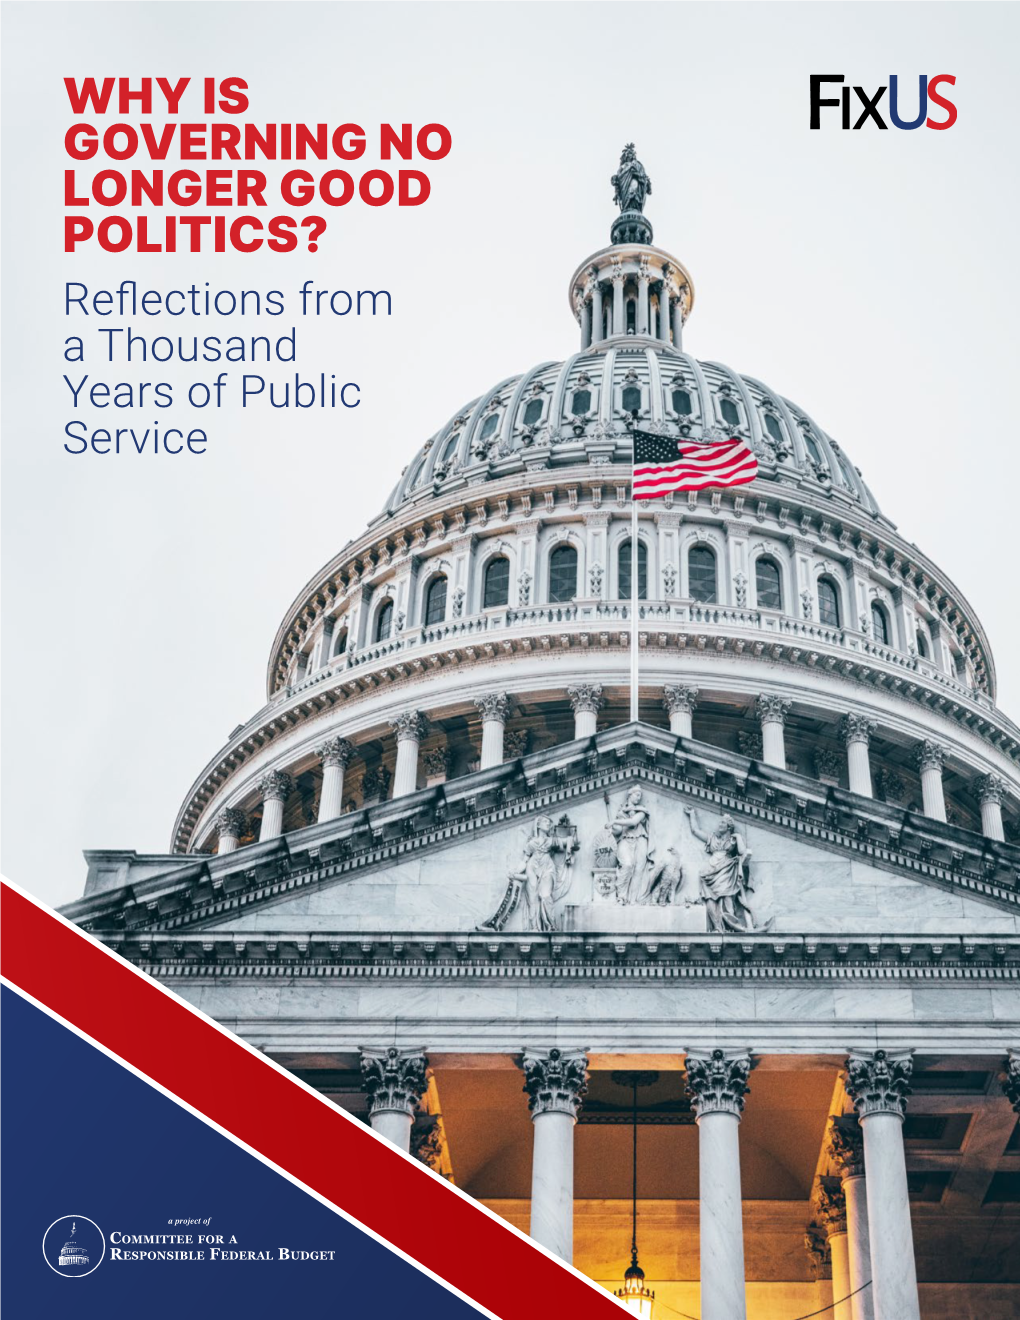 WHY IS GOVERNING NO LONGER GOOD POLITICS? Reflections from a Thousand Years of Public Service INTRODUCTION: WHY IS GOVERNING NO LONGER GOOD POLITICS?